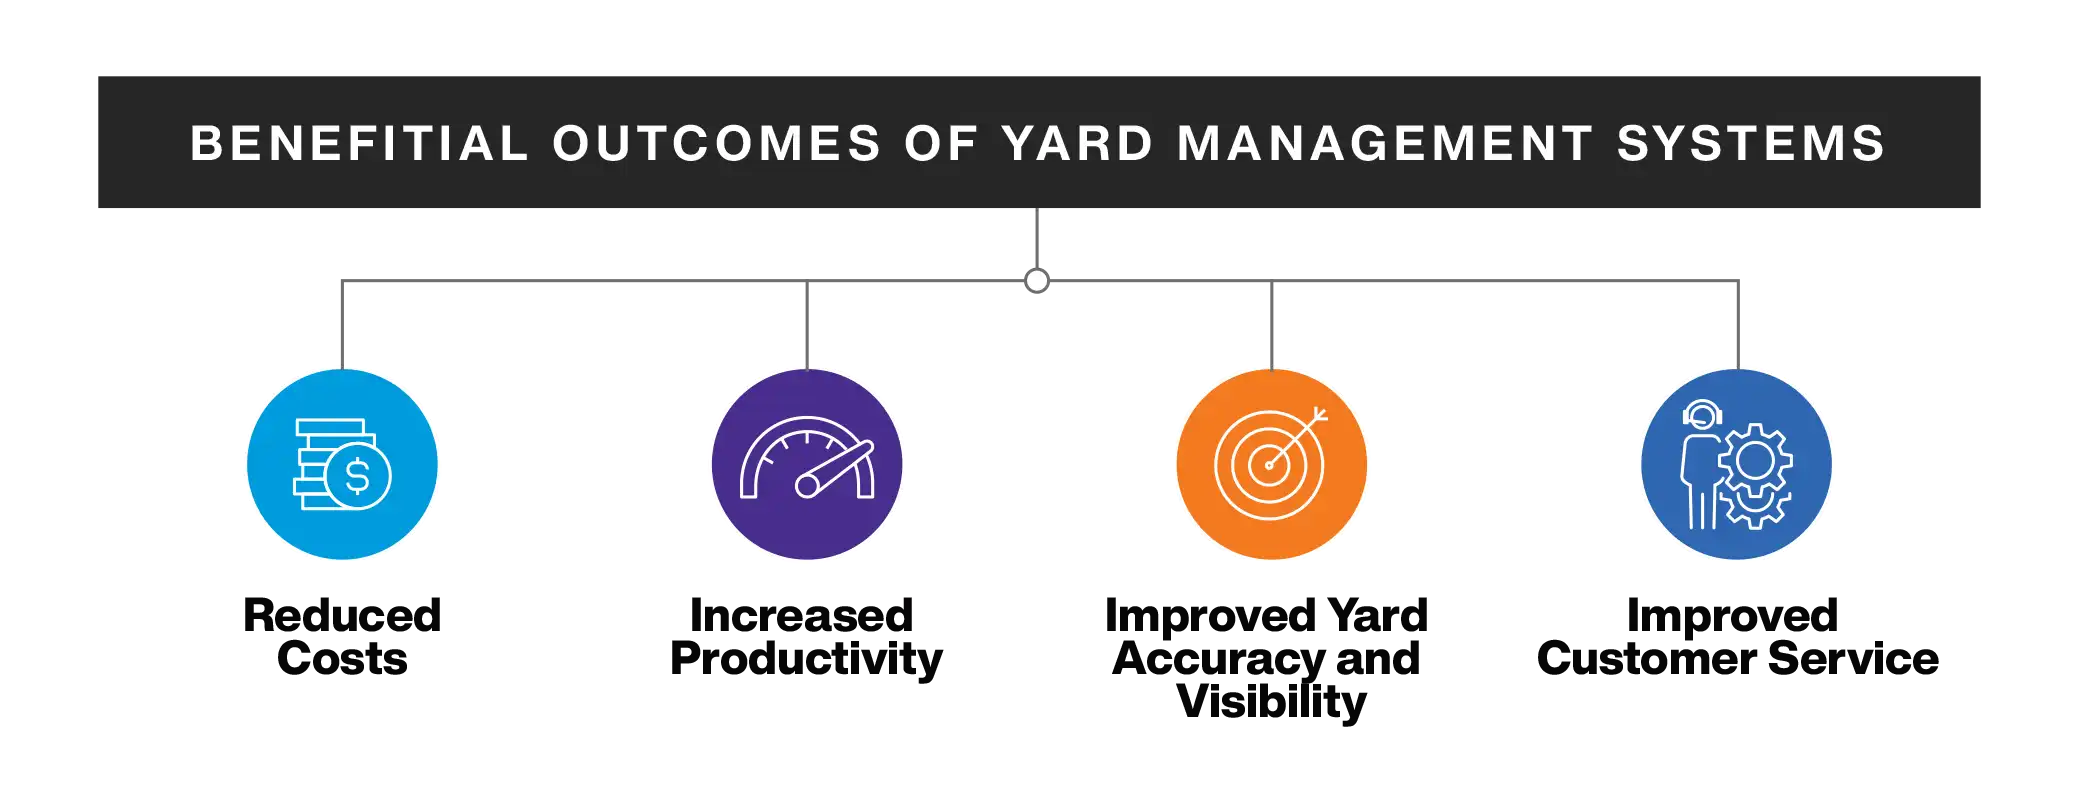 Yard Management System Outcomes